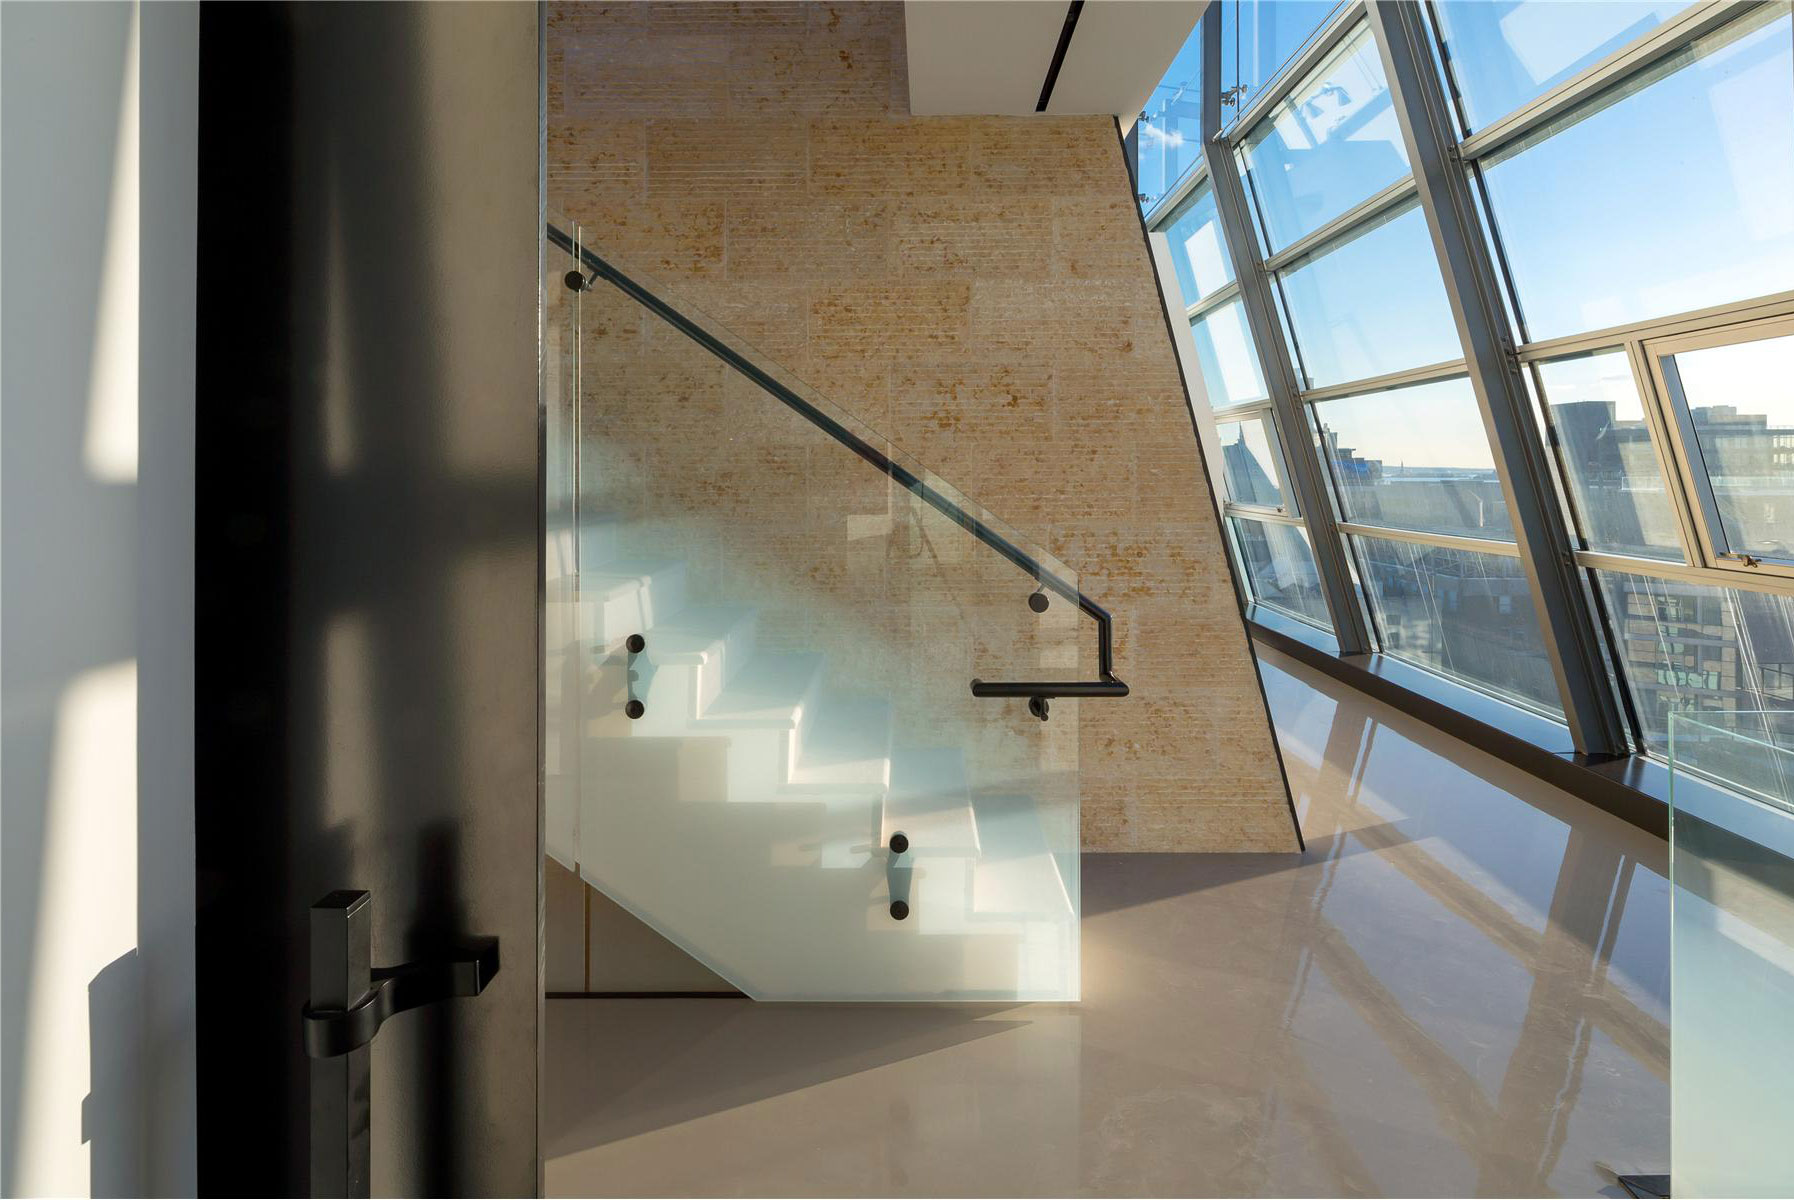 Brick Wall With Rough Brick Wall White Staircase With Glass Railing Laminate Flooring Sloping Glass Wall In Metallic Railing Greenwich Street Project Architecture Stunning Steel And Glass Structure Reflected In 497 Greenwich Street Penthouse